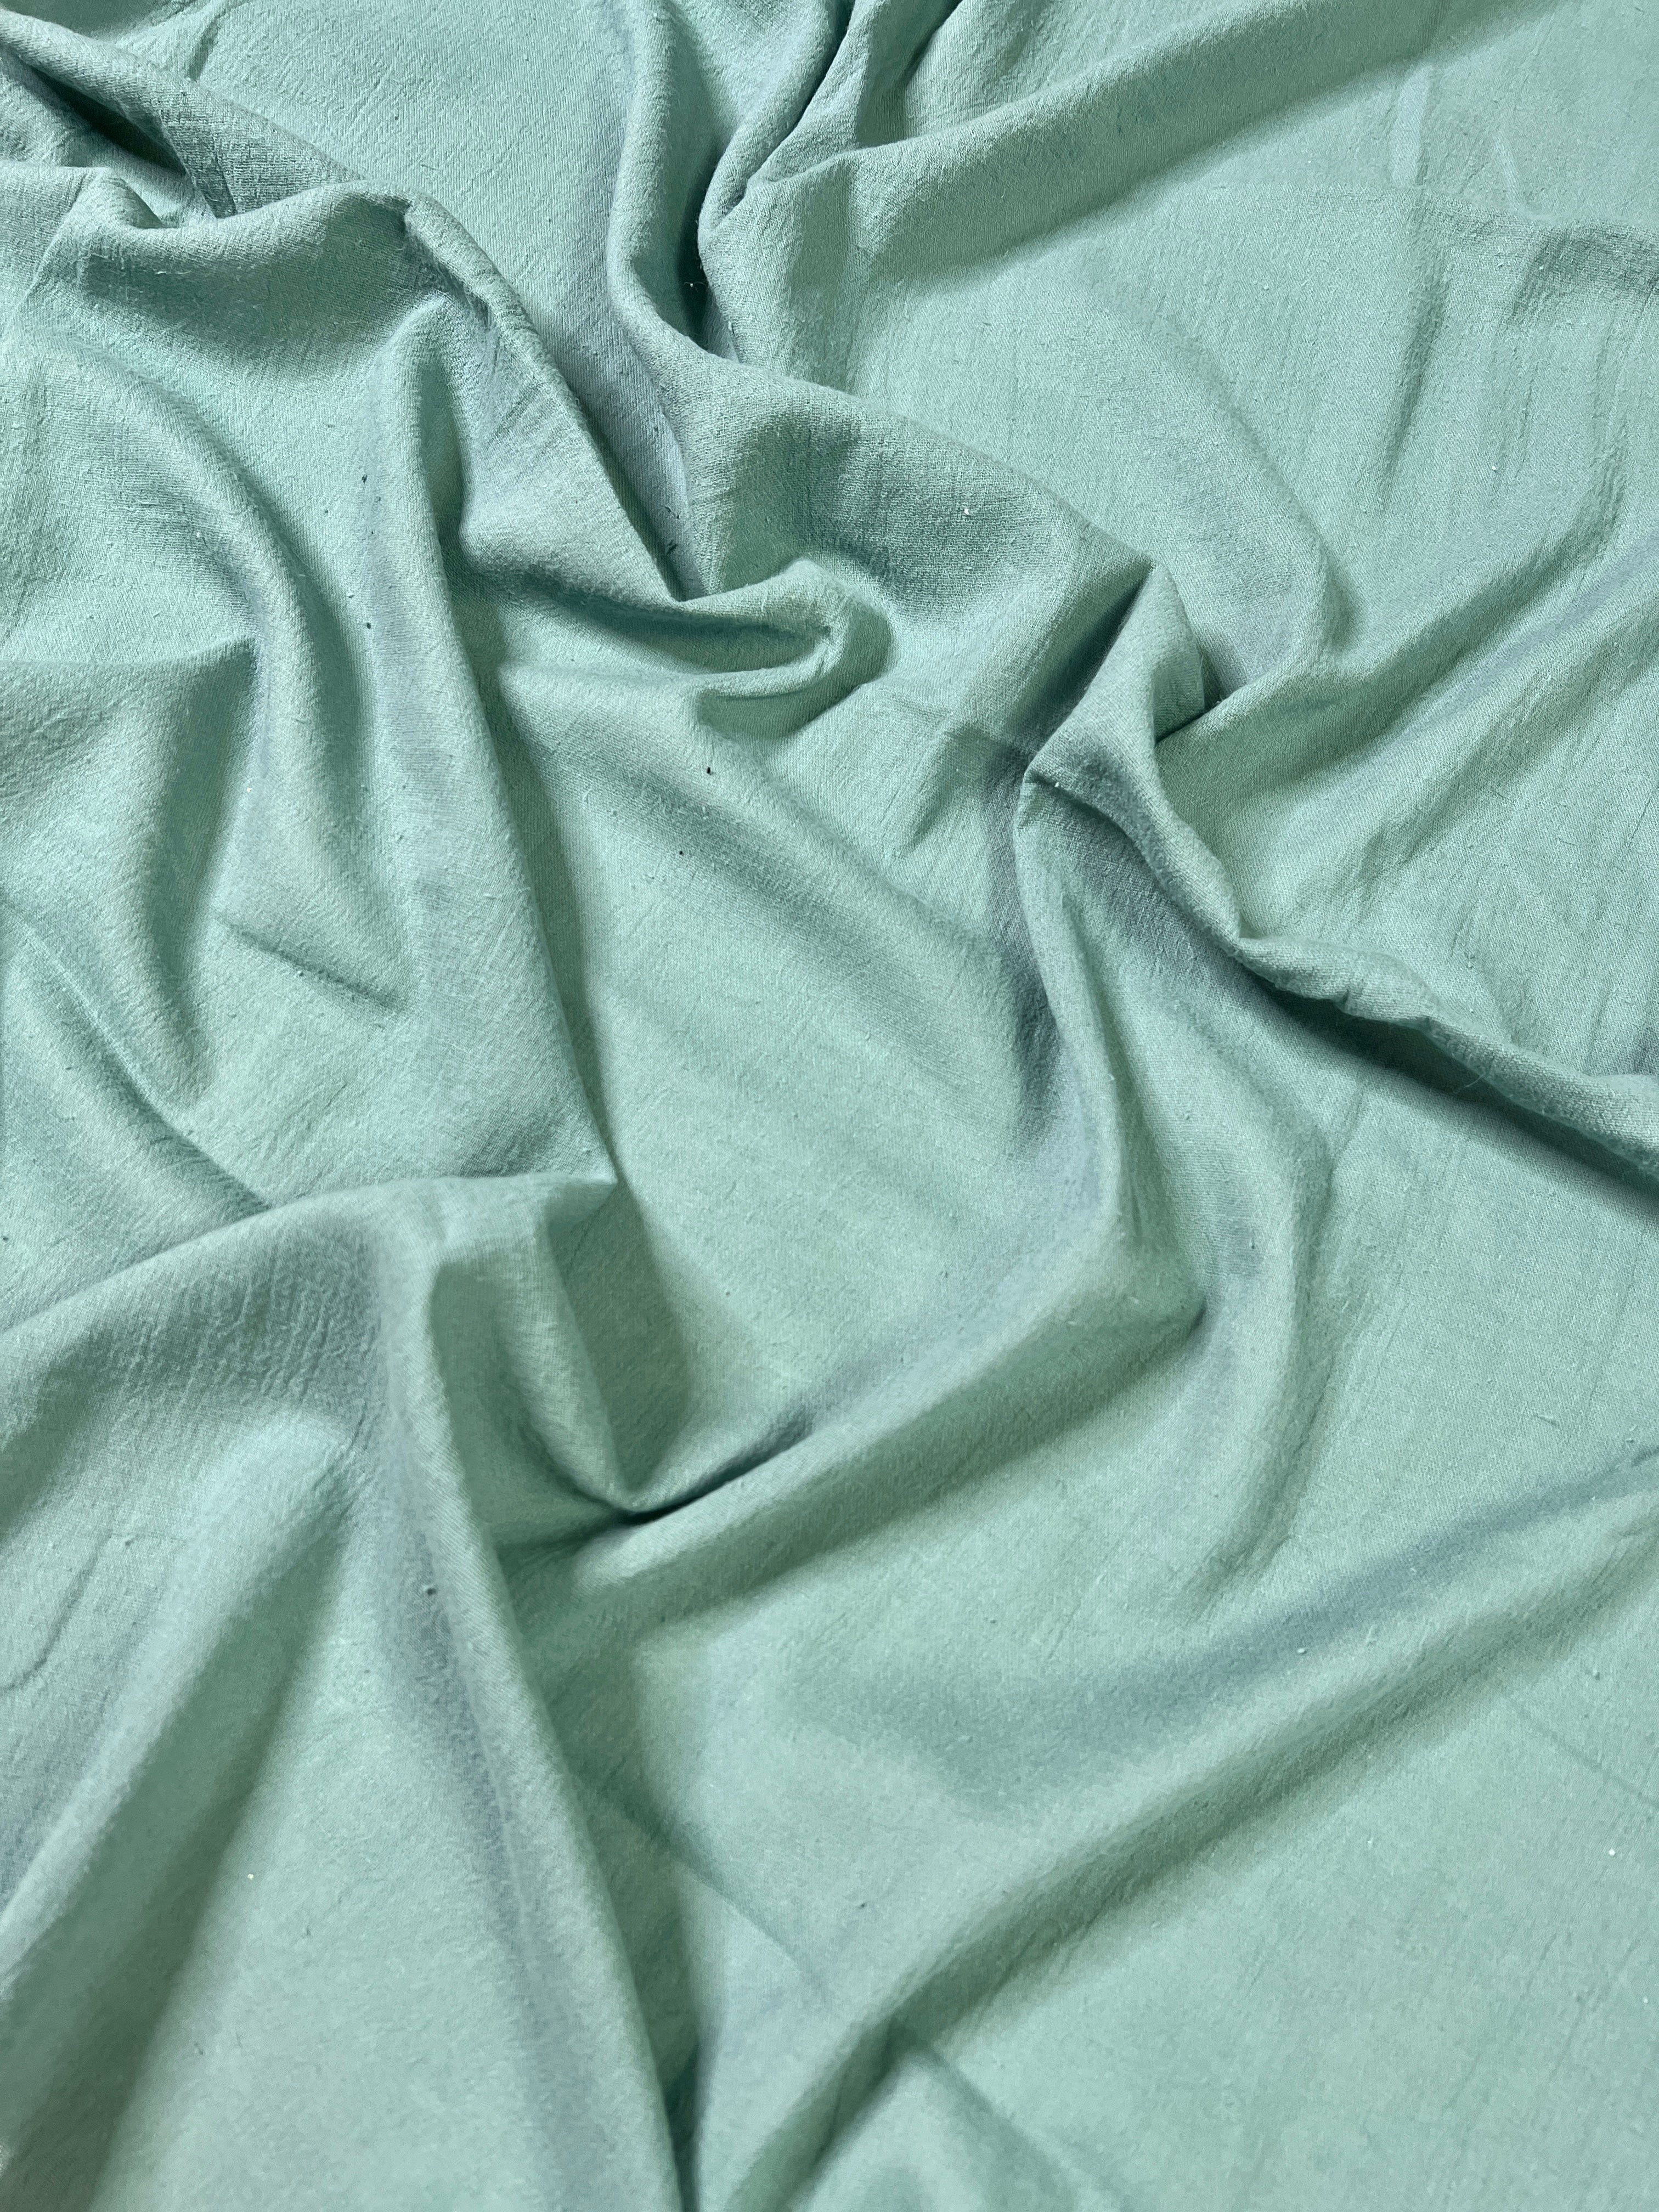 forest Green Cotton Gauze, cotton gauze fabric, green gauze fabric, dark green gauze, cotton for woman, double gauze light green, coton gauze for bride, cotton gauze in low price